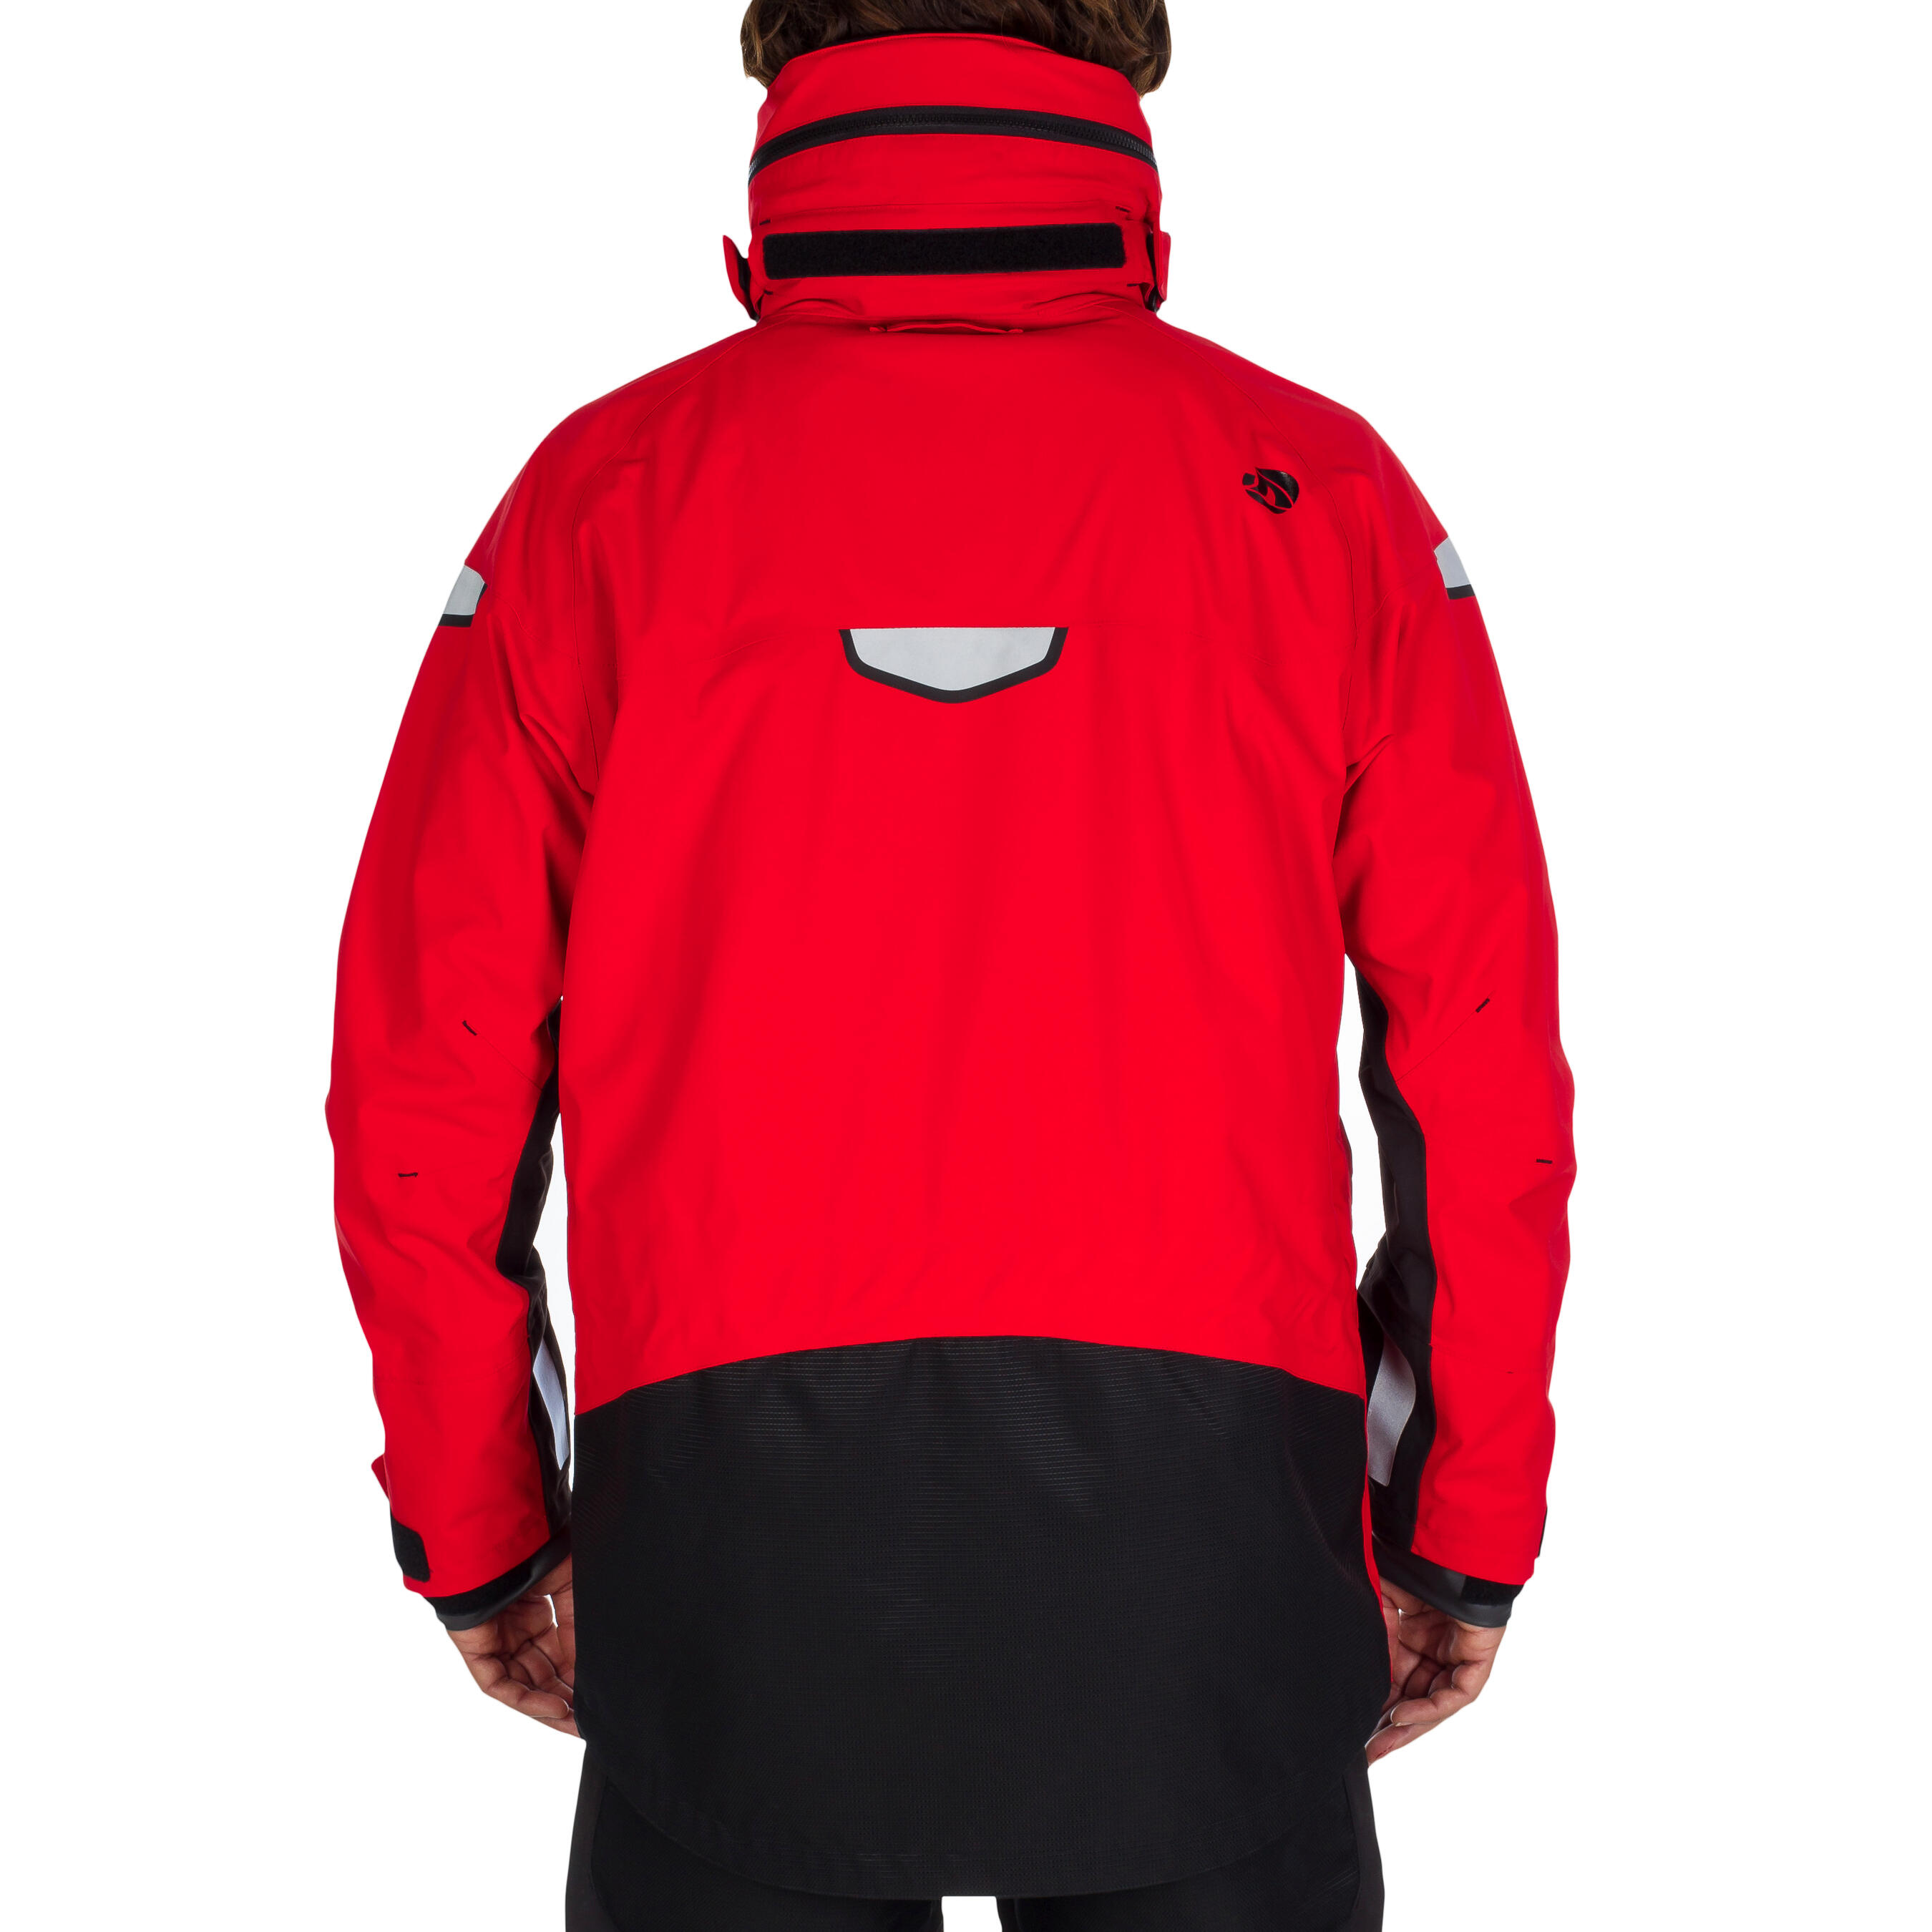 Ozean 900 Men's Waterproof and Breathable Sailing Jacket - Red 7/44